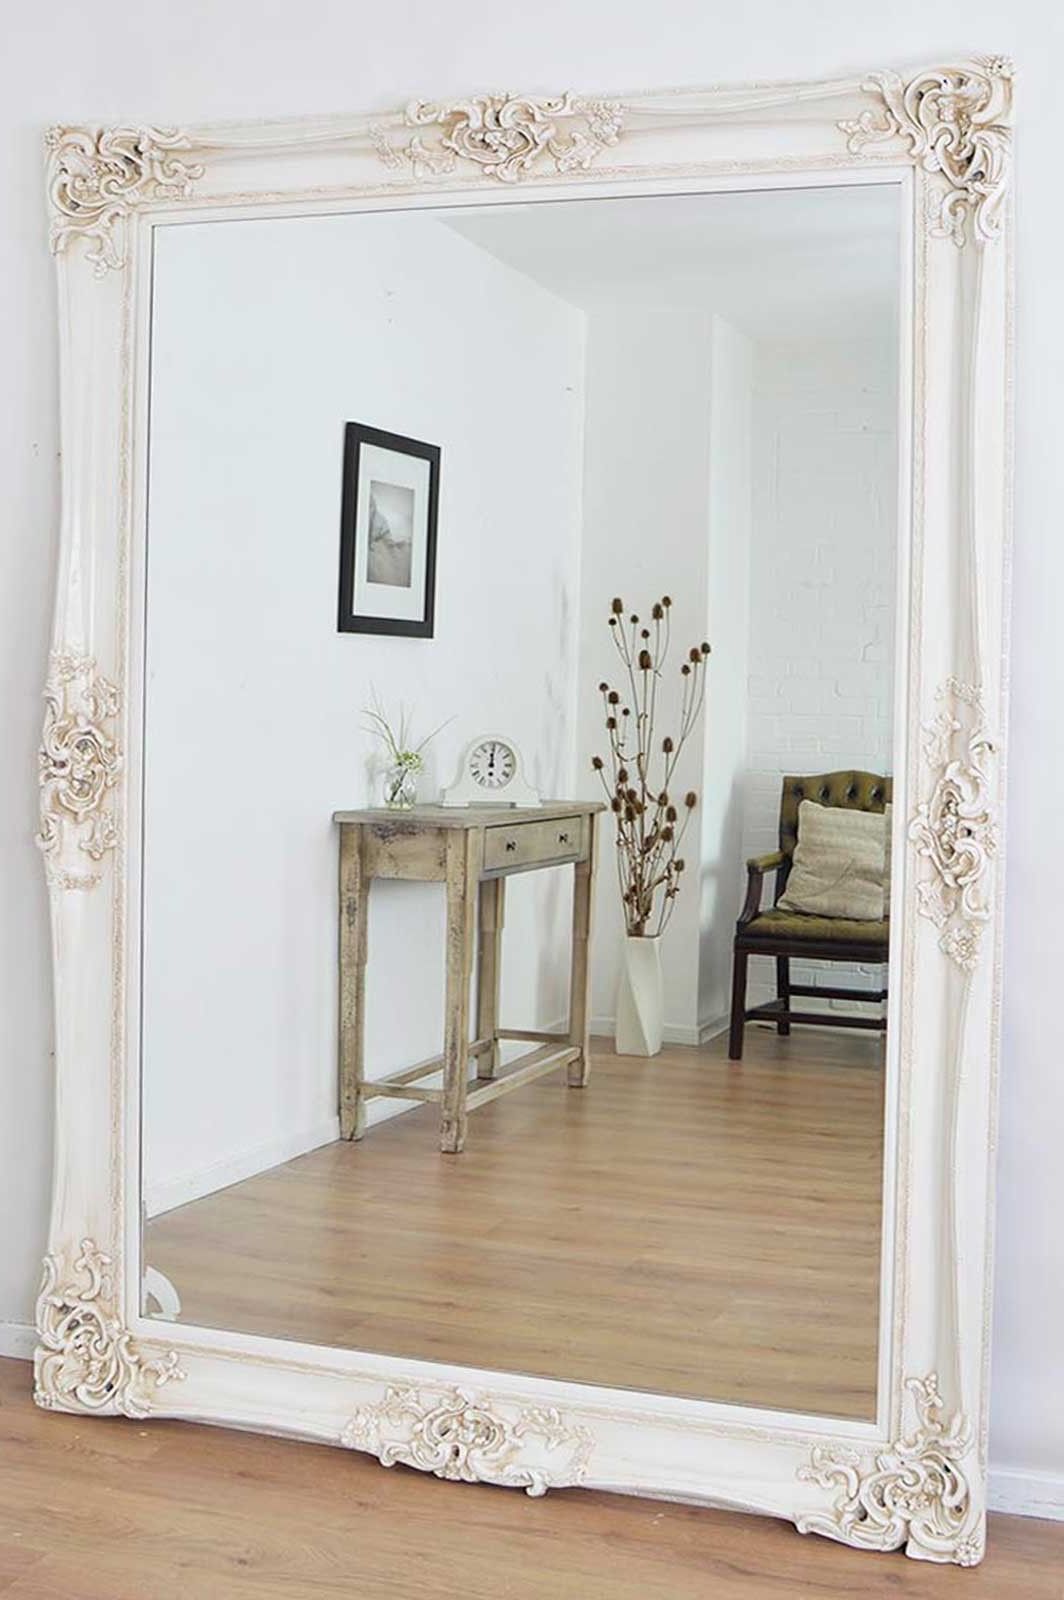 Article: Extra Large Decorative Wall Mirrors ›› Page 1